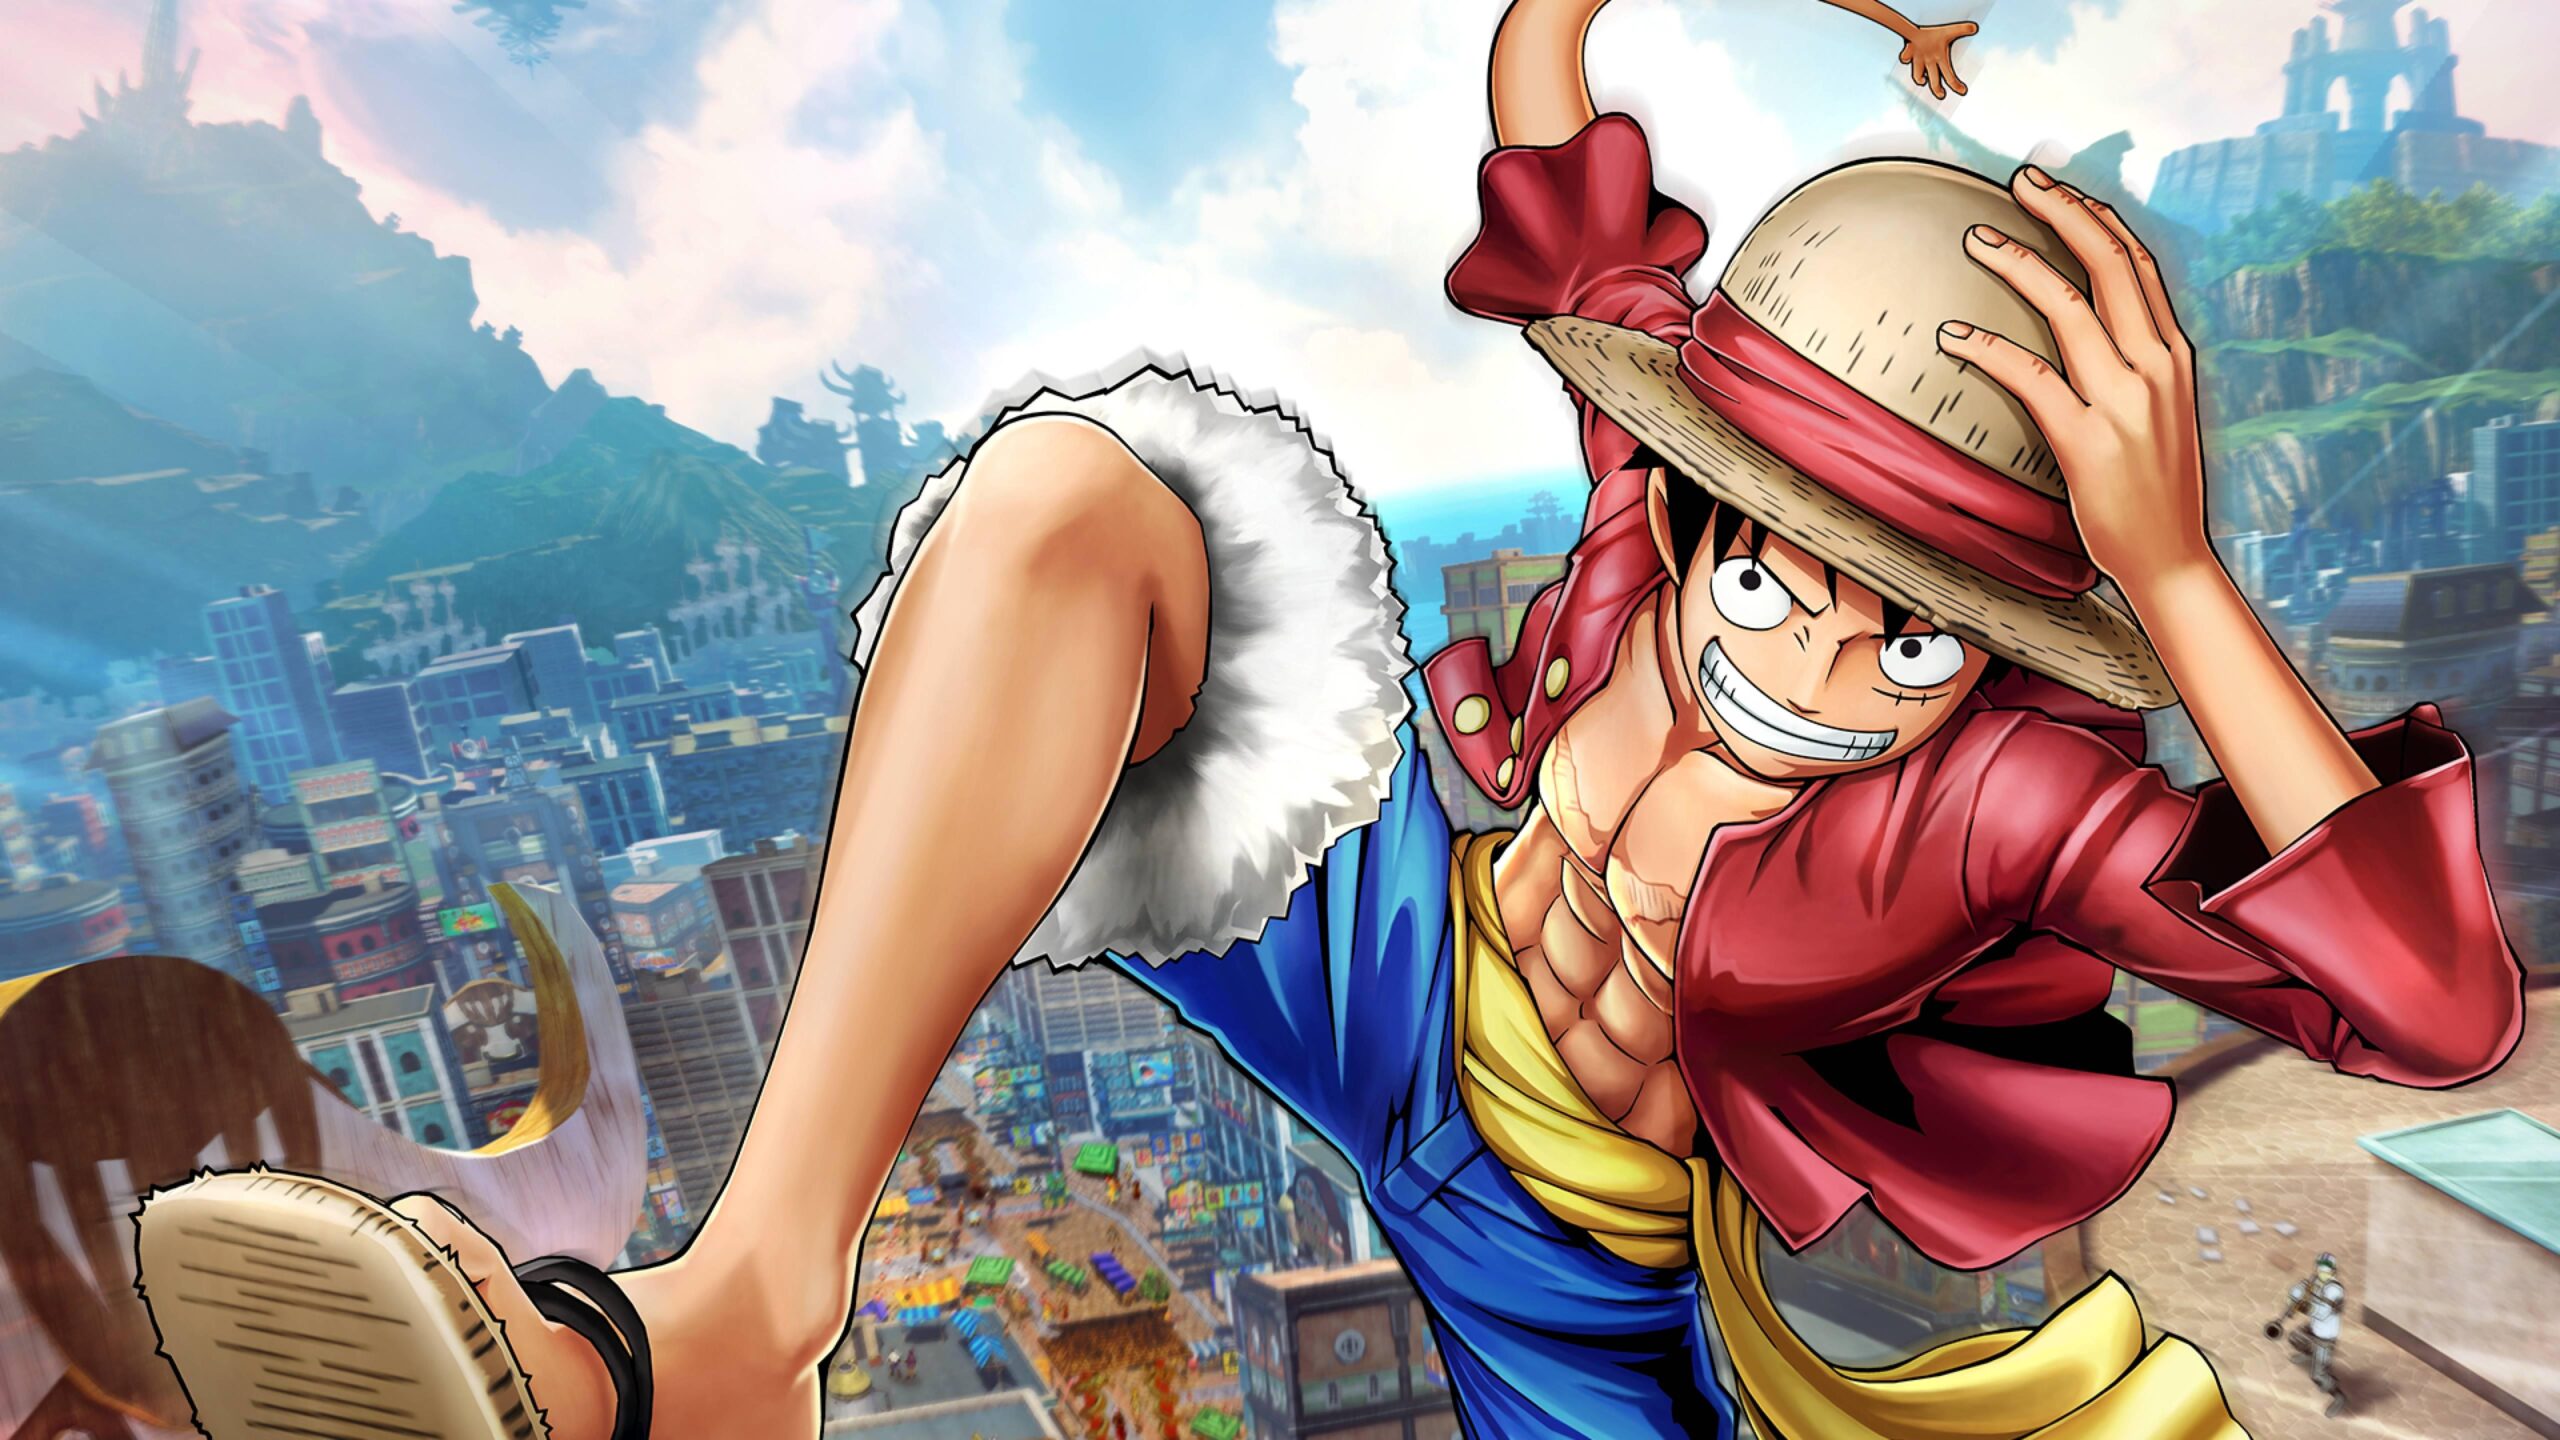 33 Monkey D. Luffy Live Wallpapers, Animated Wallpapers - MoeWalls